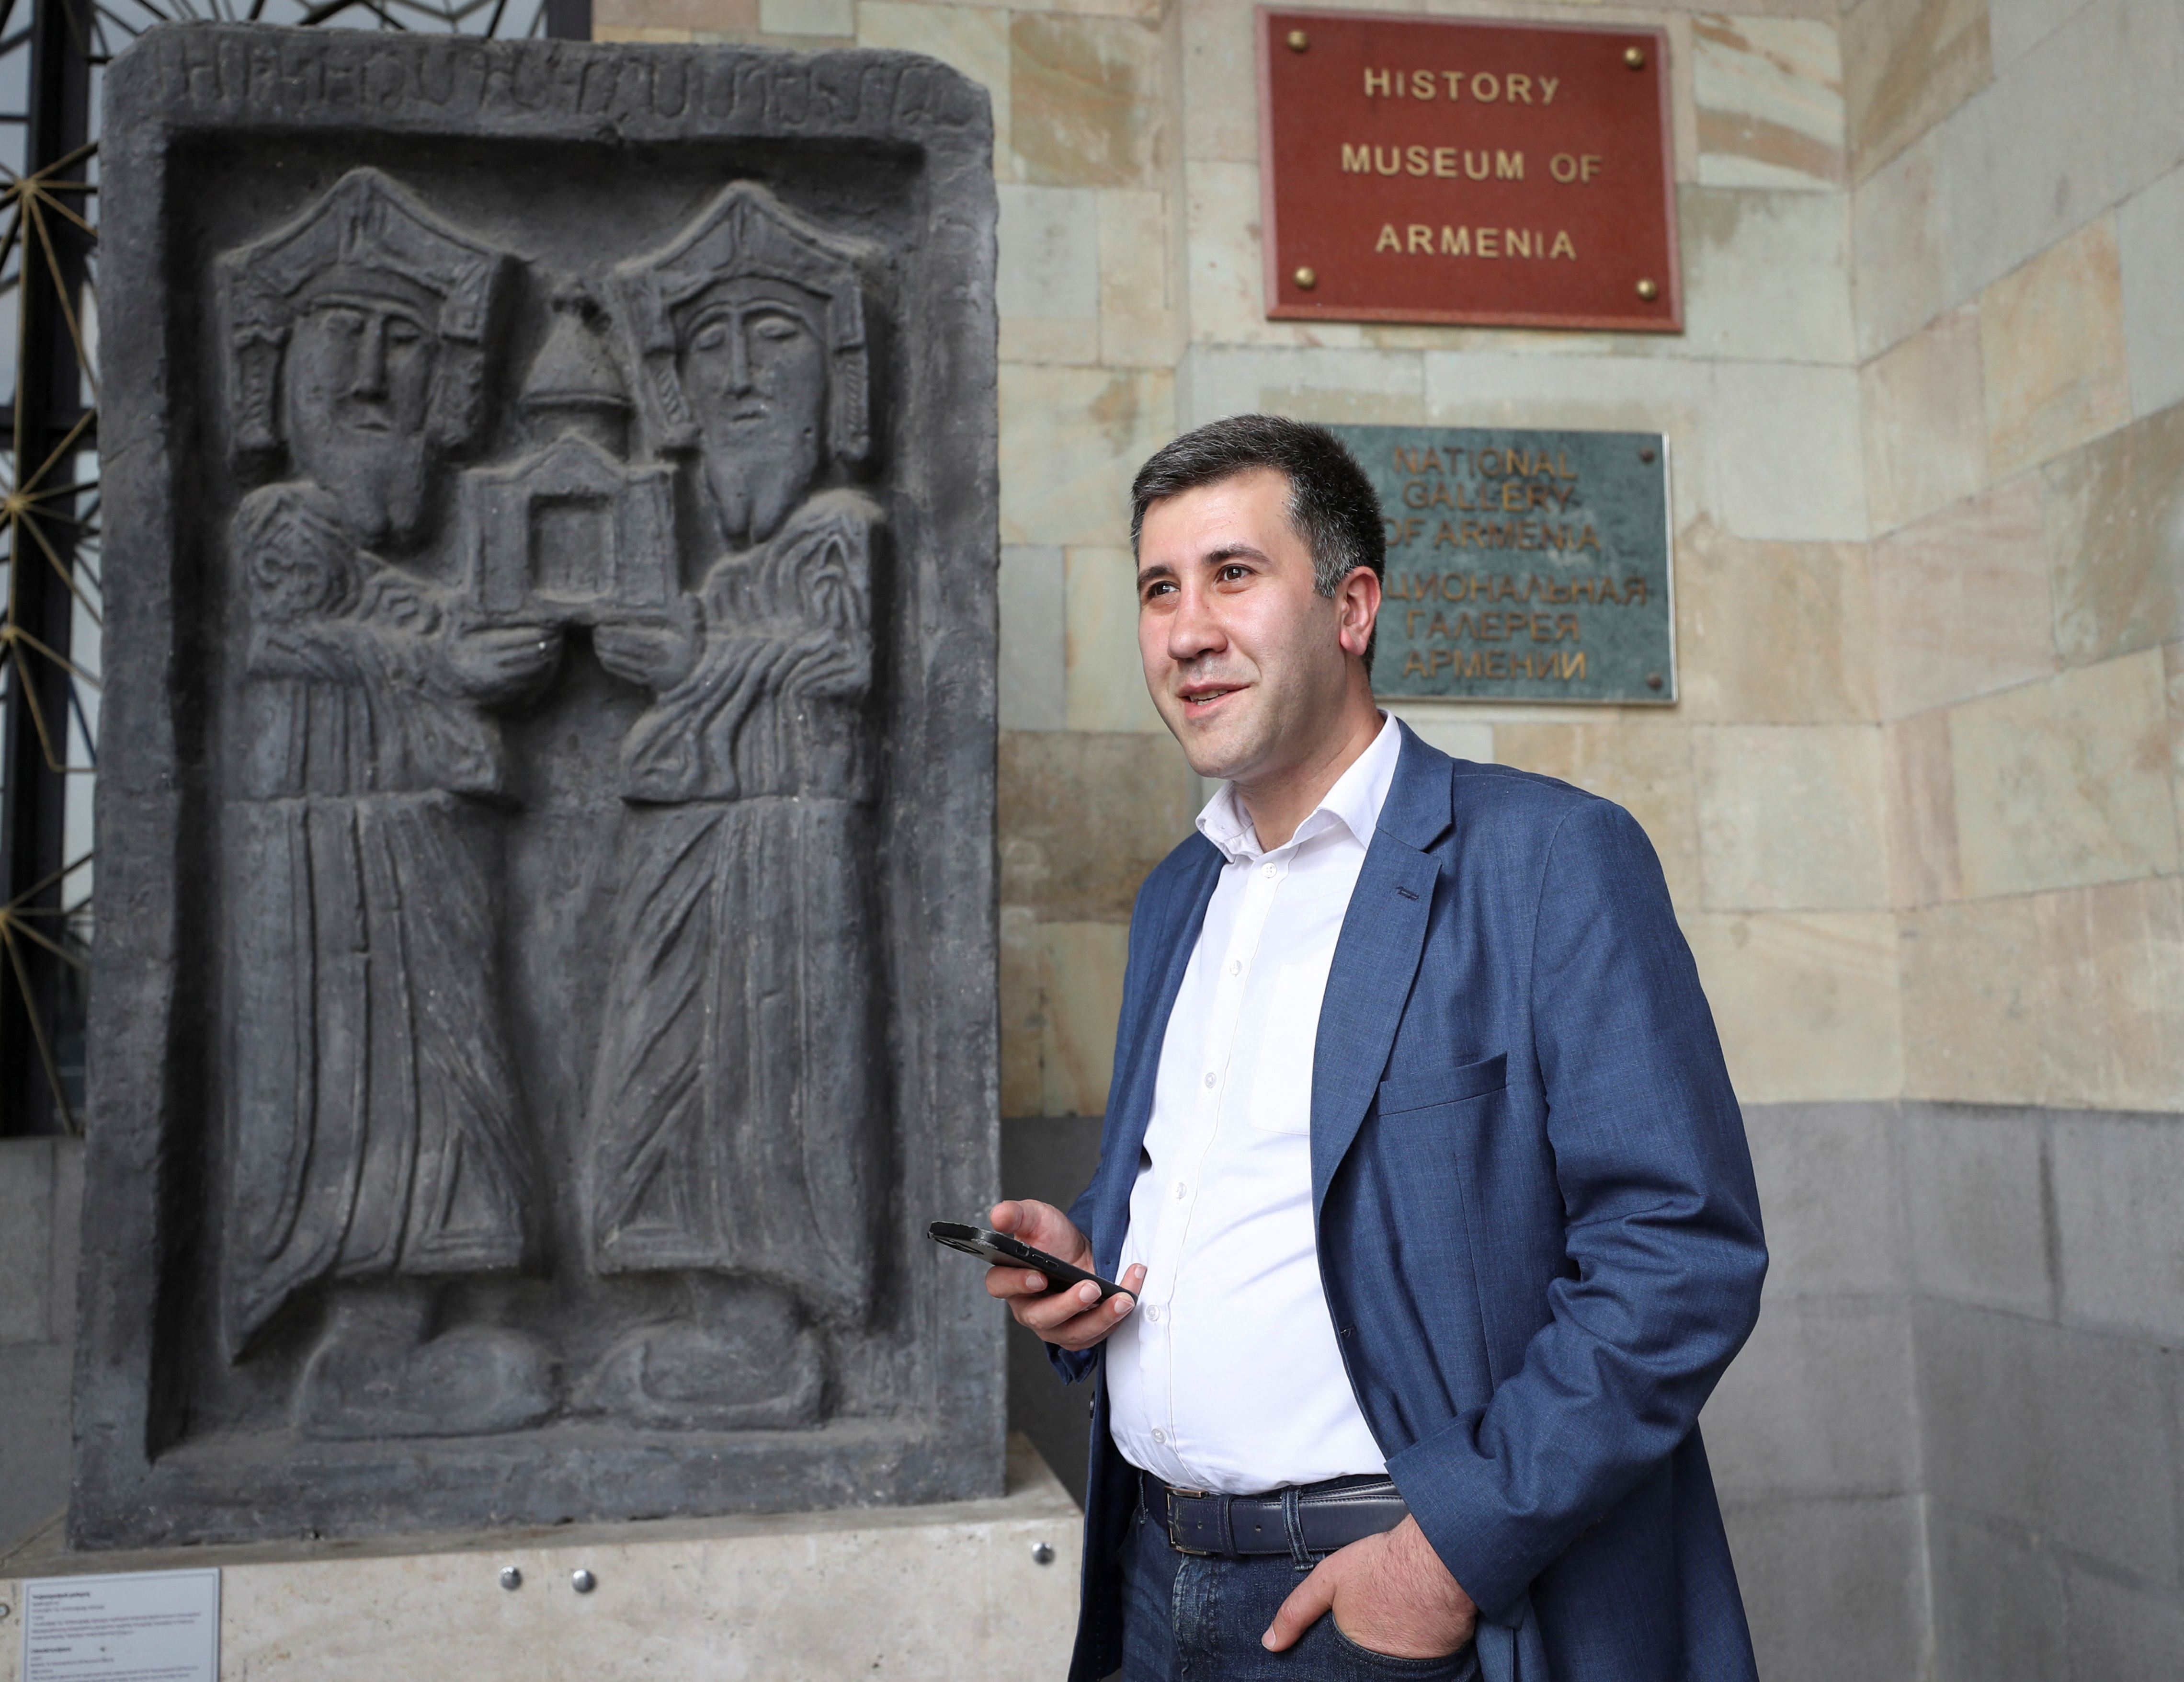 Ruben Melikyan, Armenian lawyer and human rights activist, is seen in Yerevan